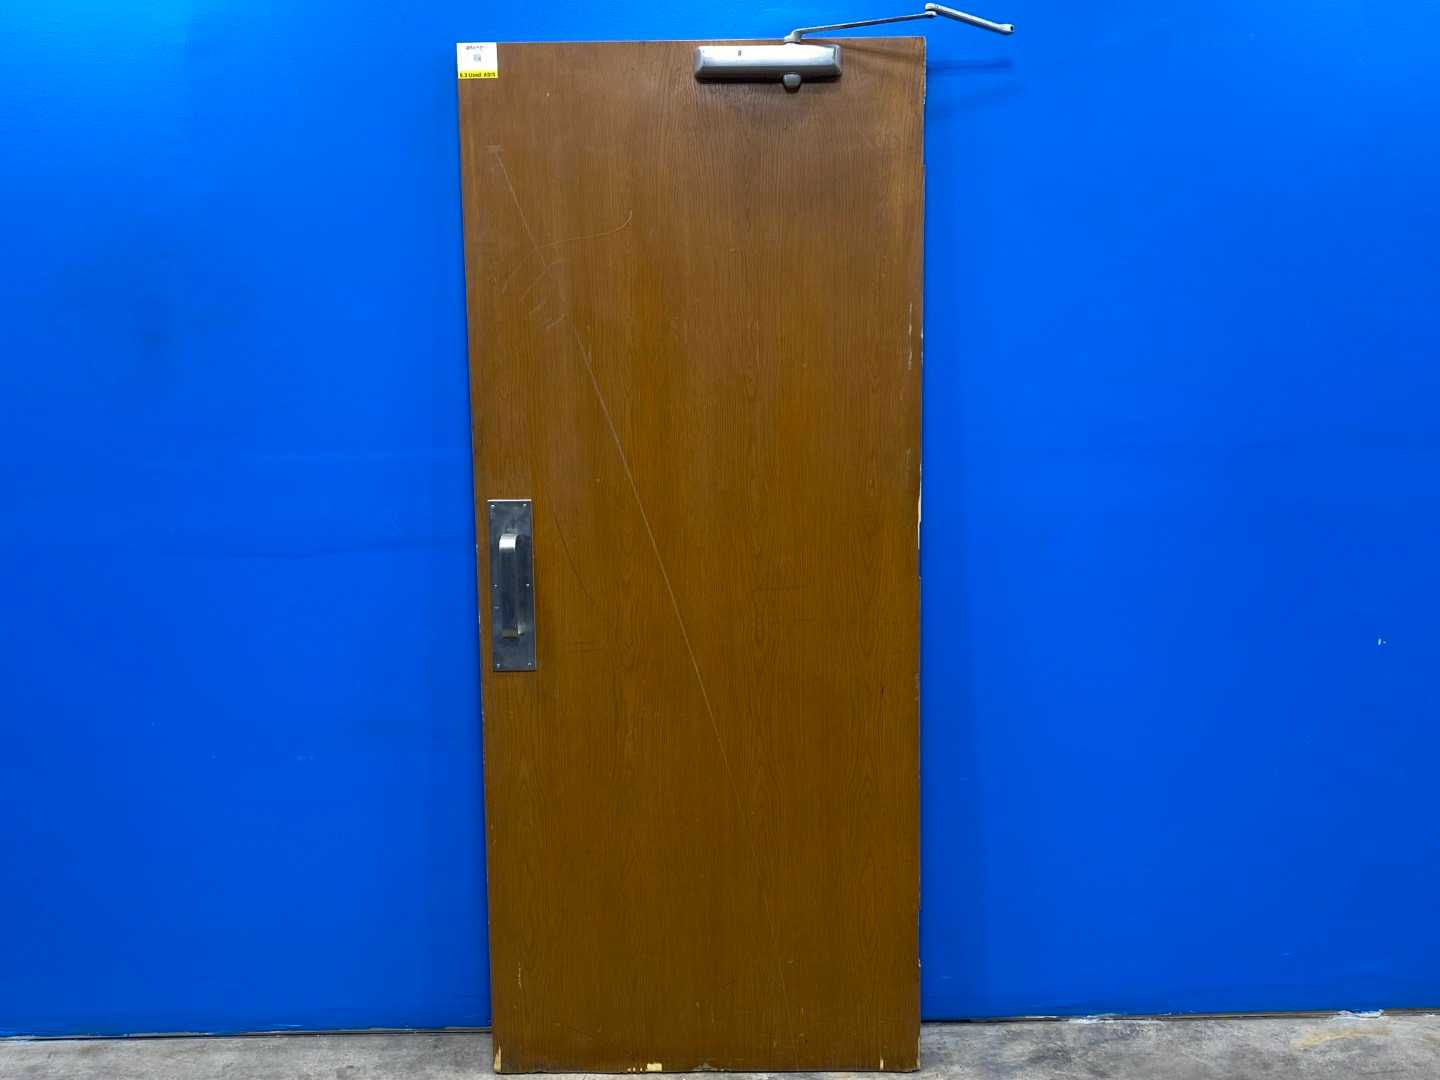 3.0X7.0 SOLID CORE DOOR with hardware and auto close